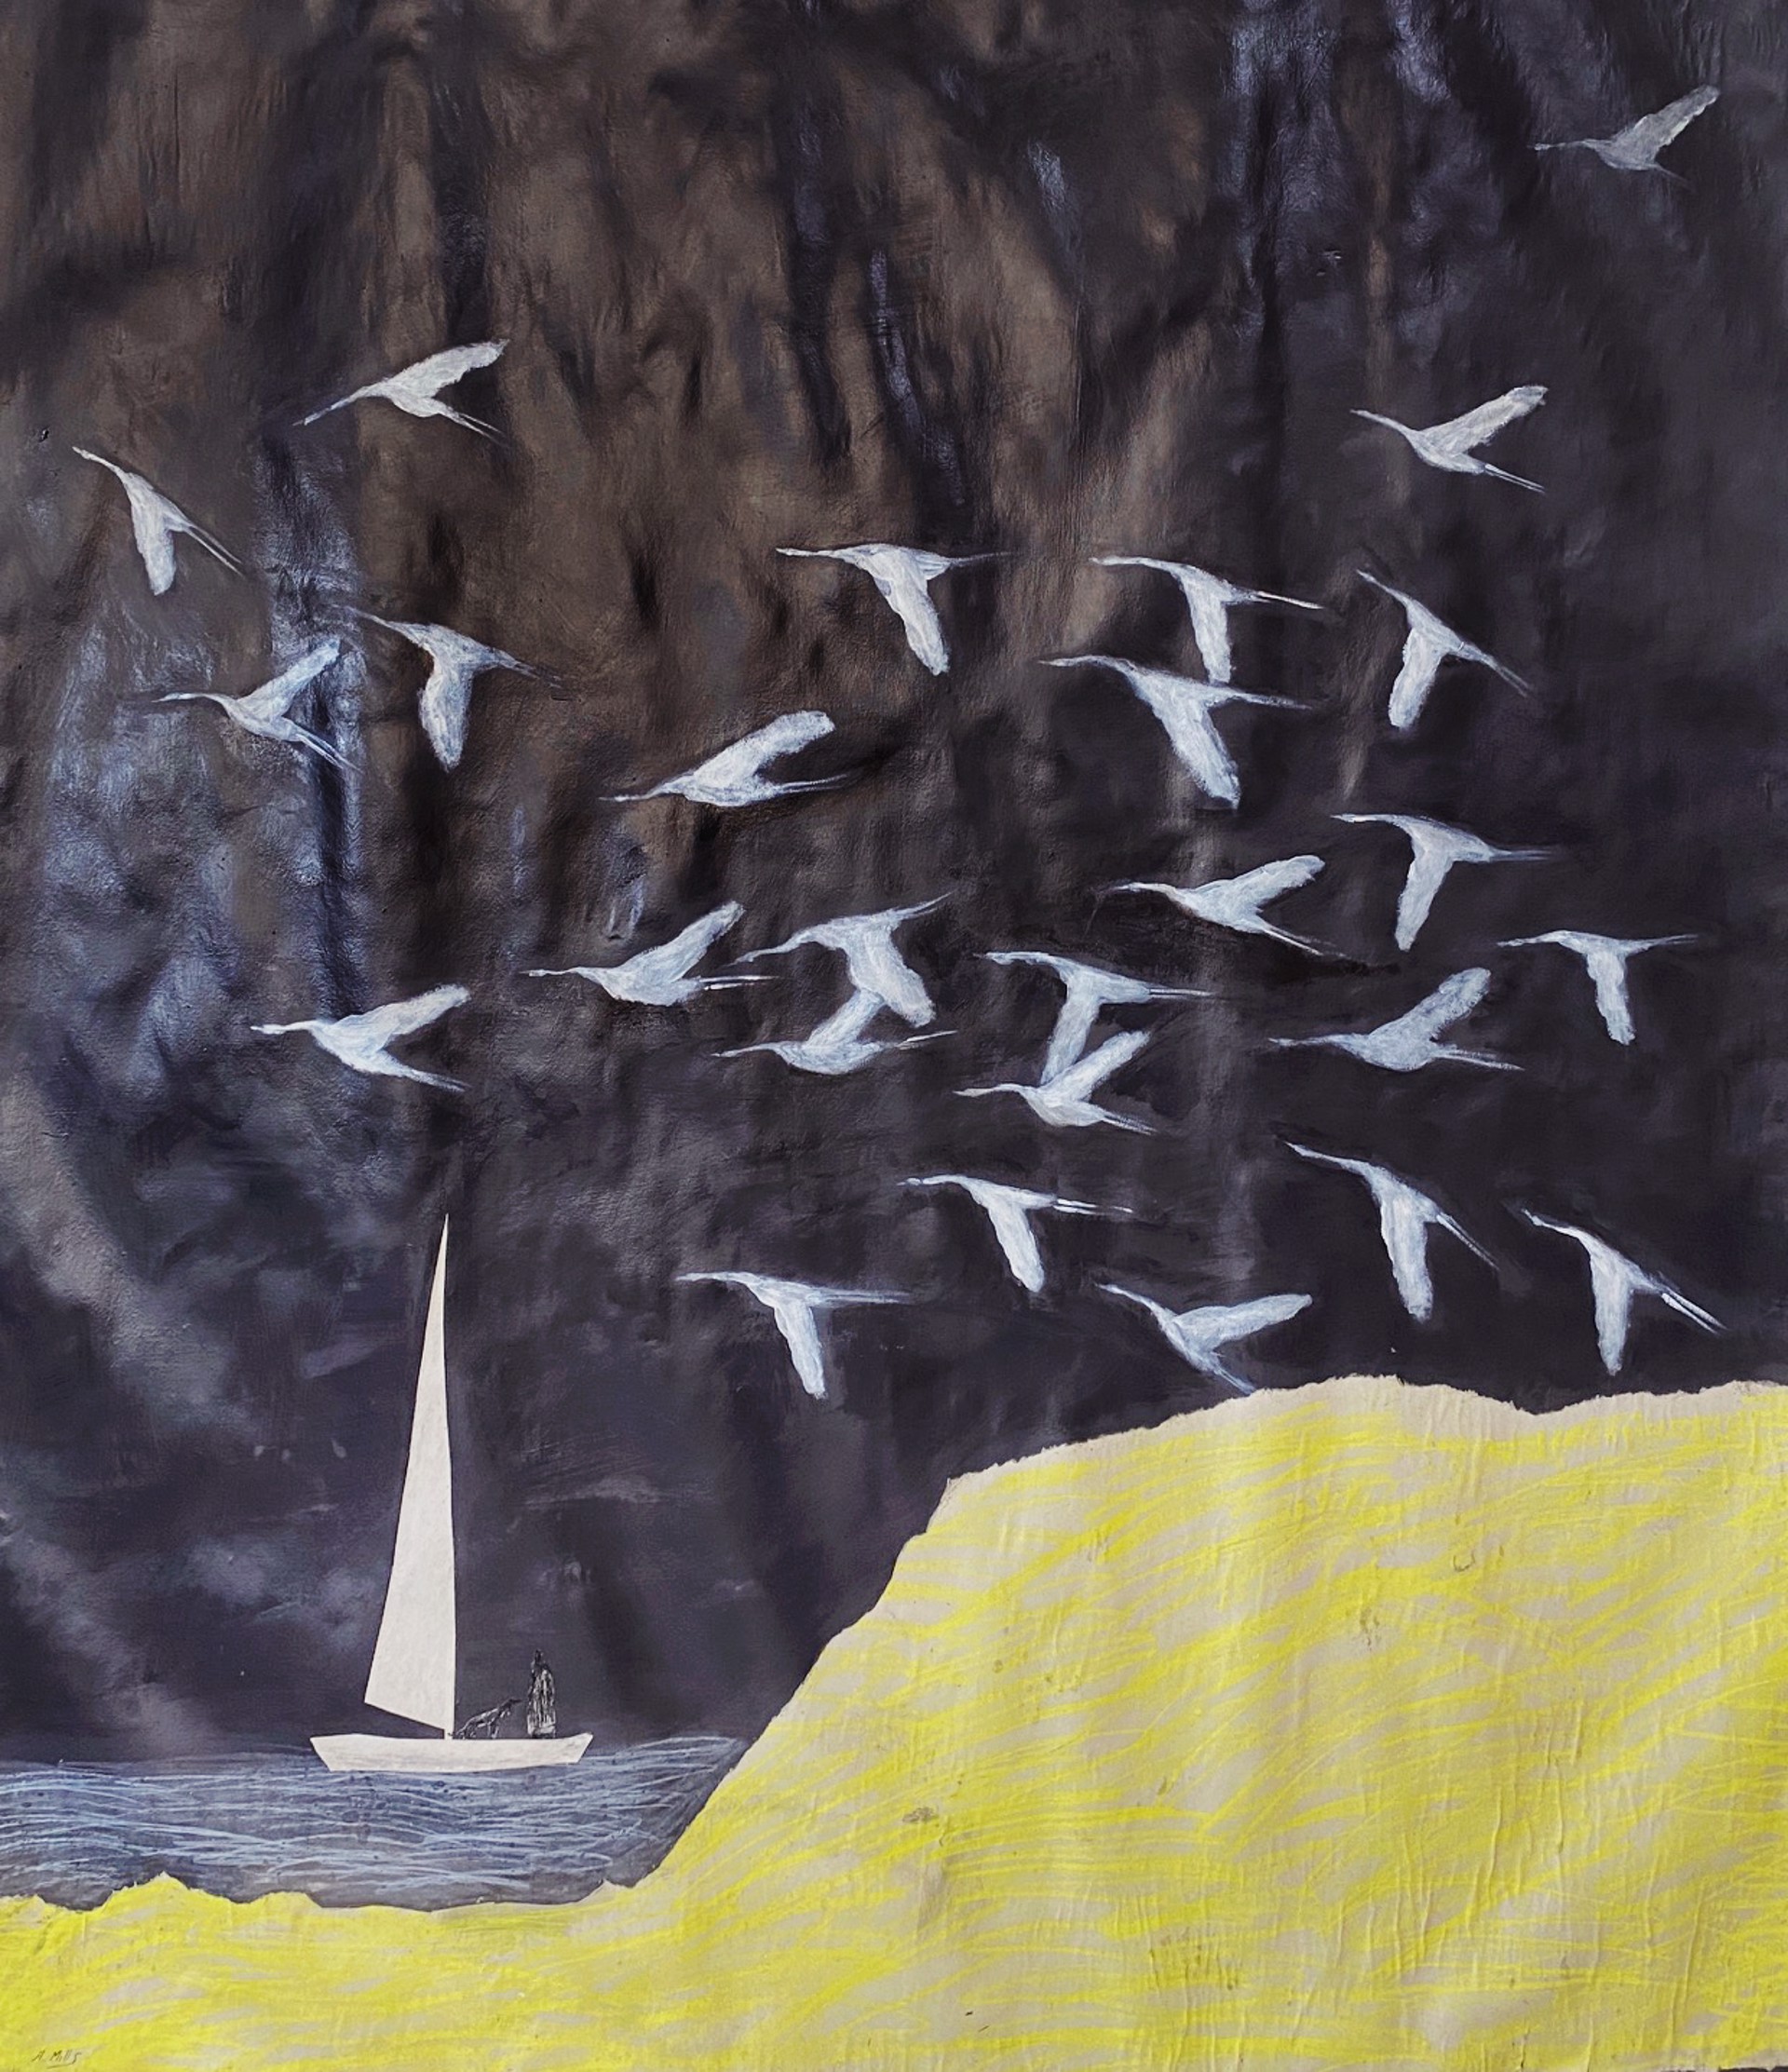 Night Sail/Cliff and Geese by Gigi Mills